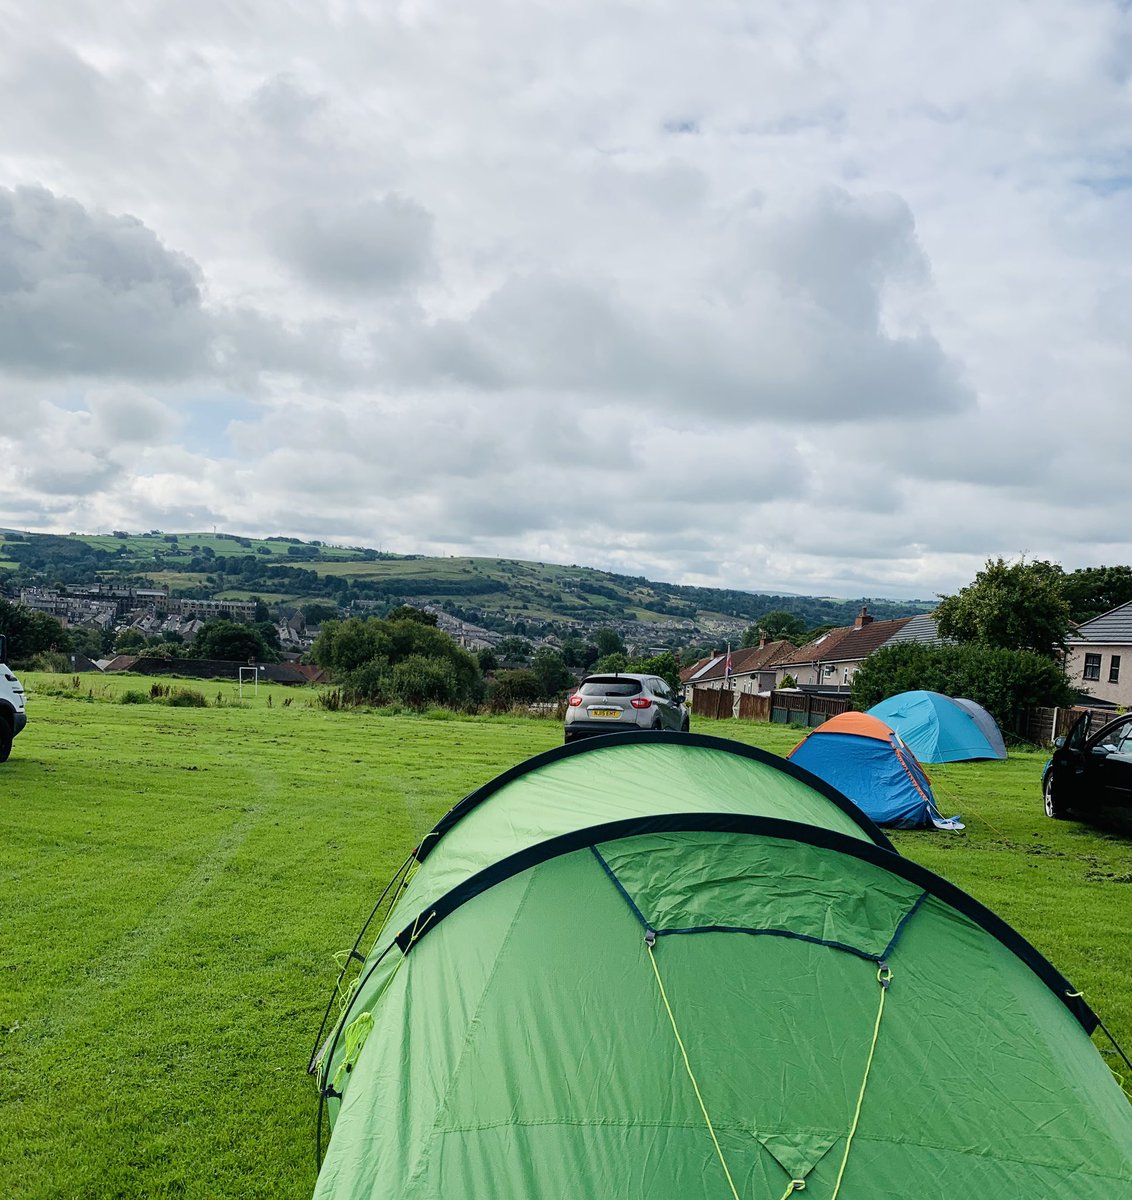 @ColneBlues @ColneNelsonRUFC @visitcolne @PendleBC Great views from the tent too 😎